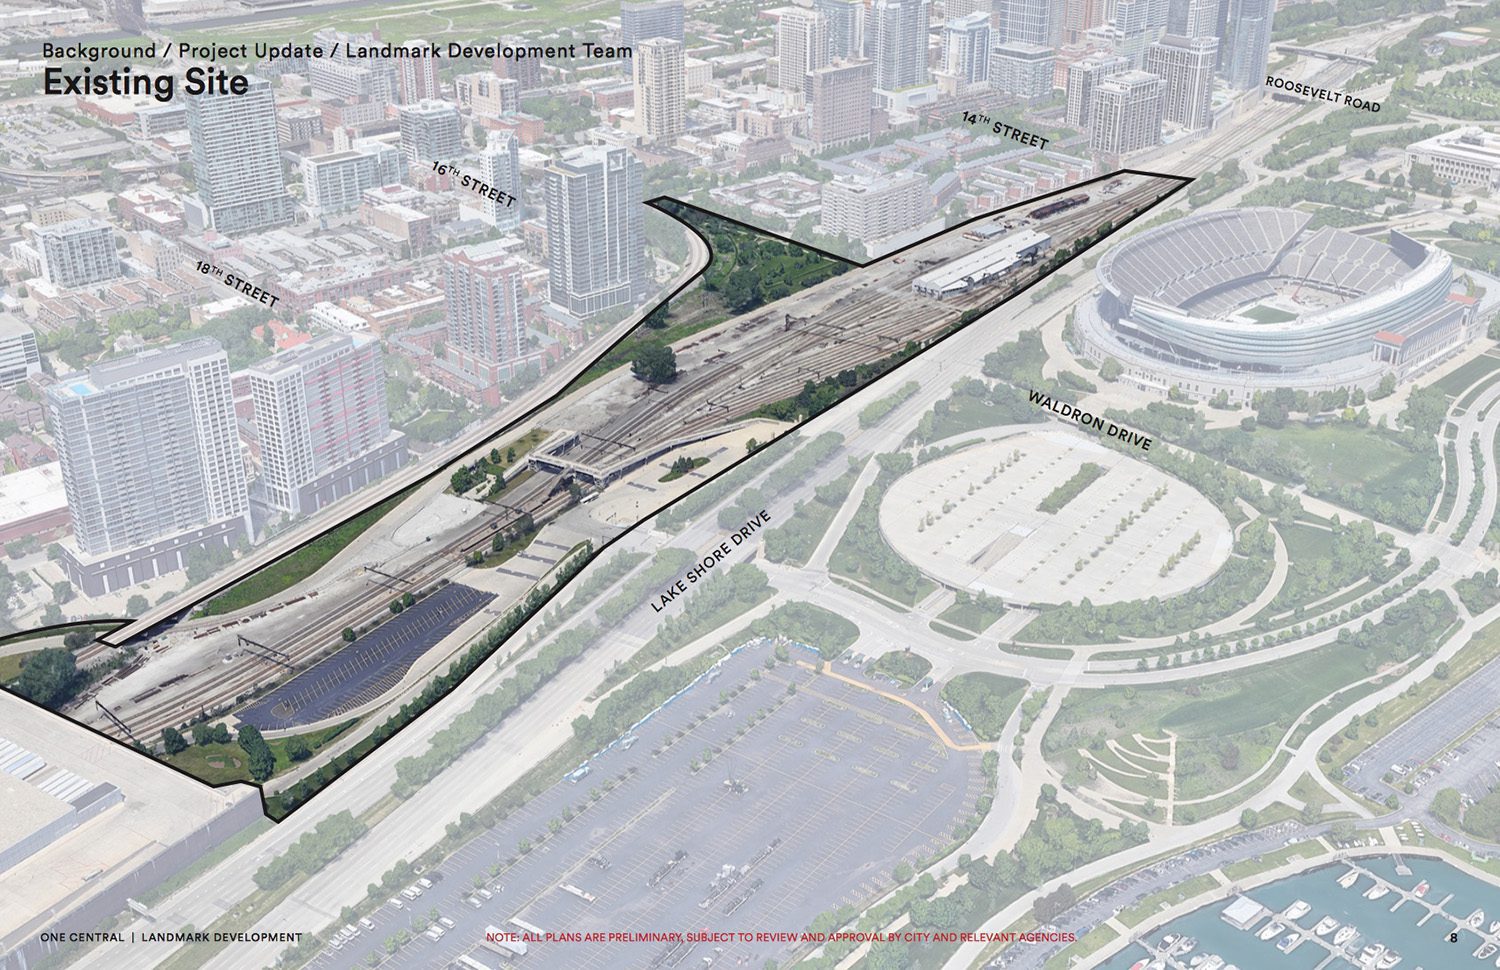 Plans for the site at ONE Central Chicago in Near South Side